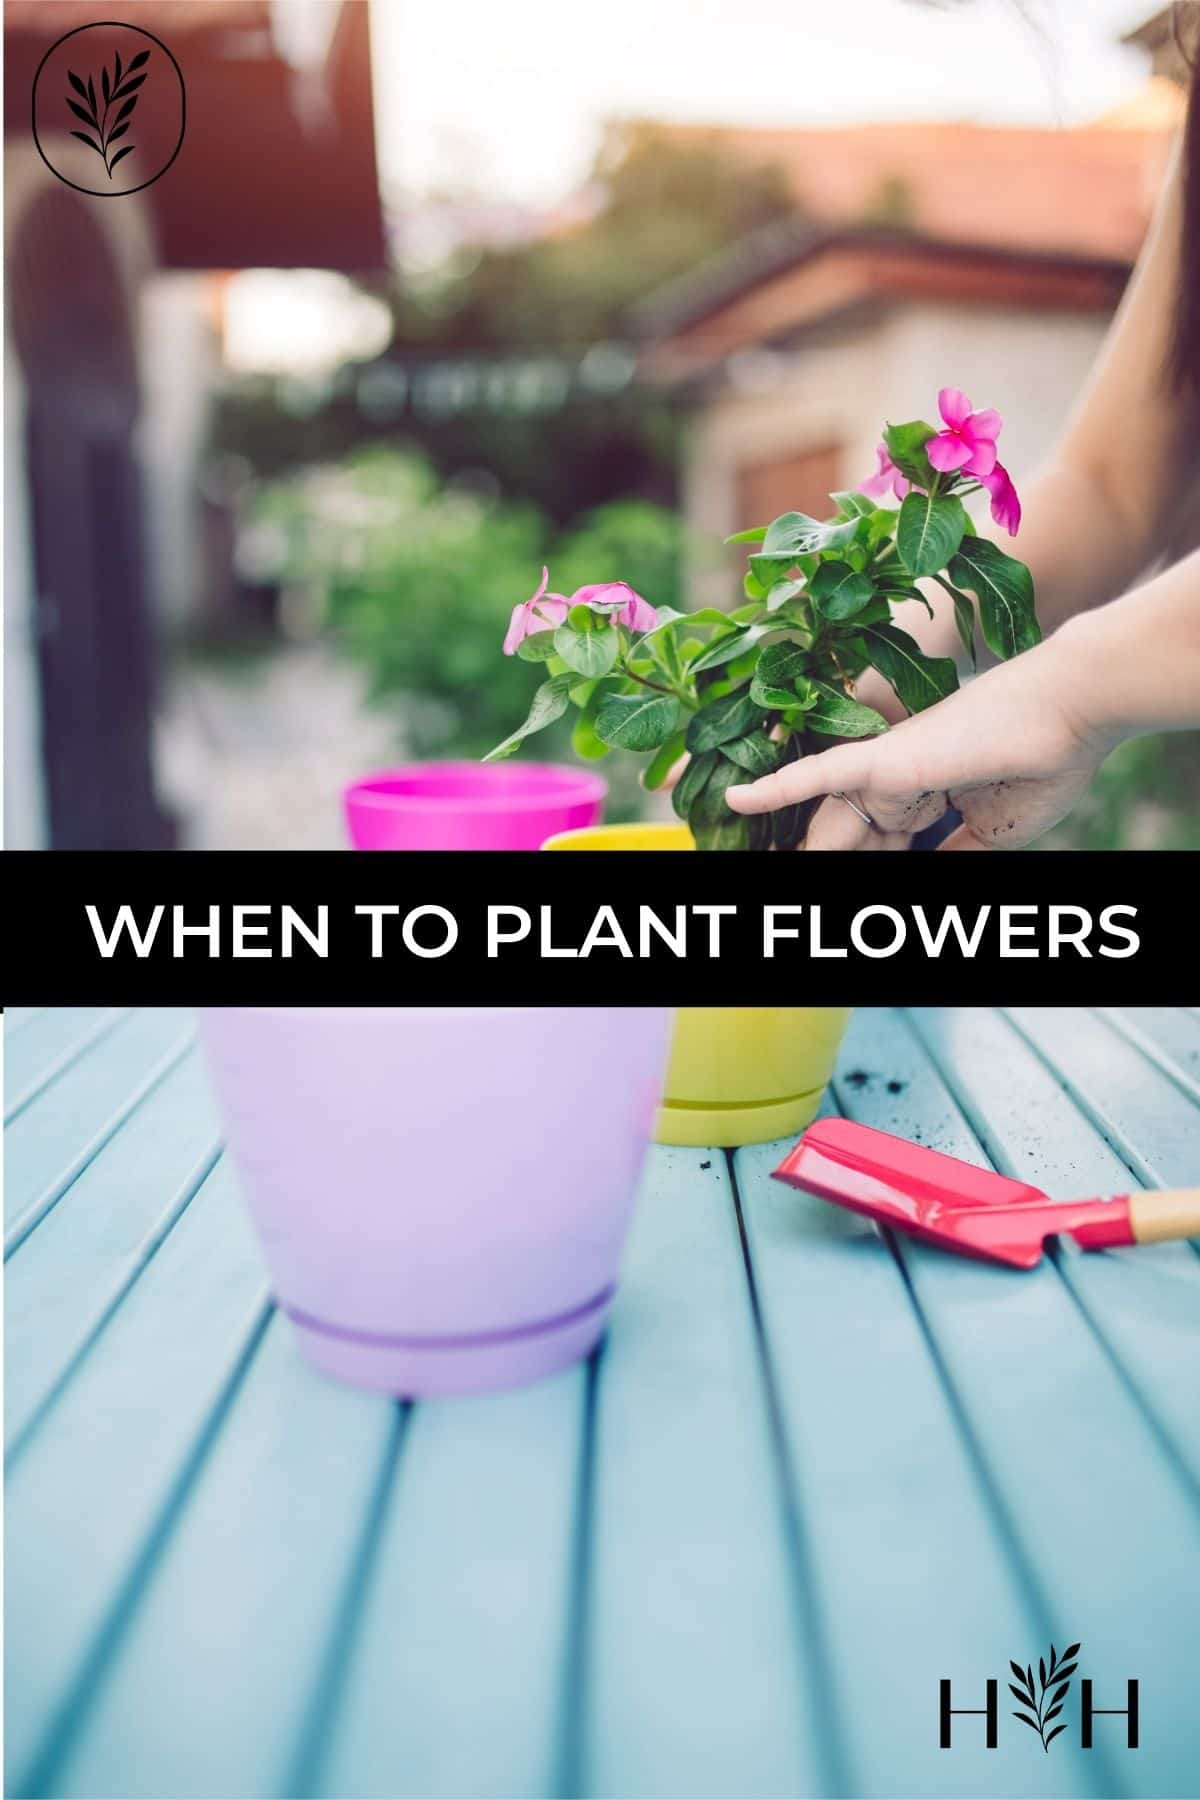 When to plant flowers via @home4theharvest